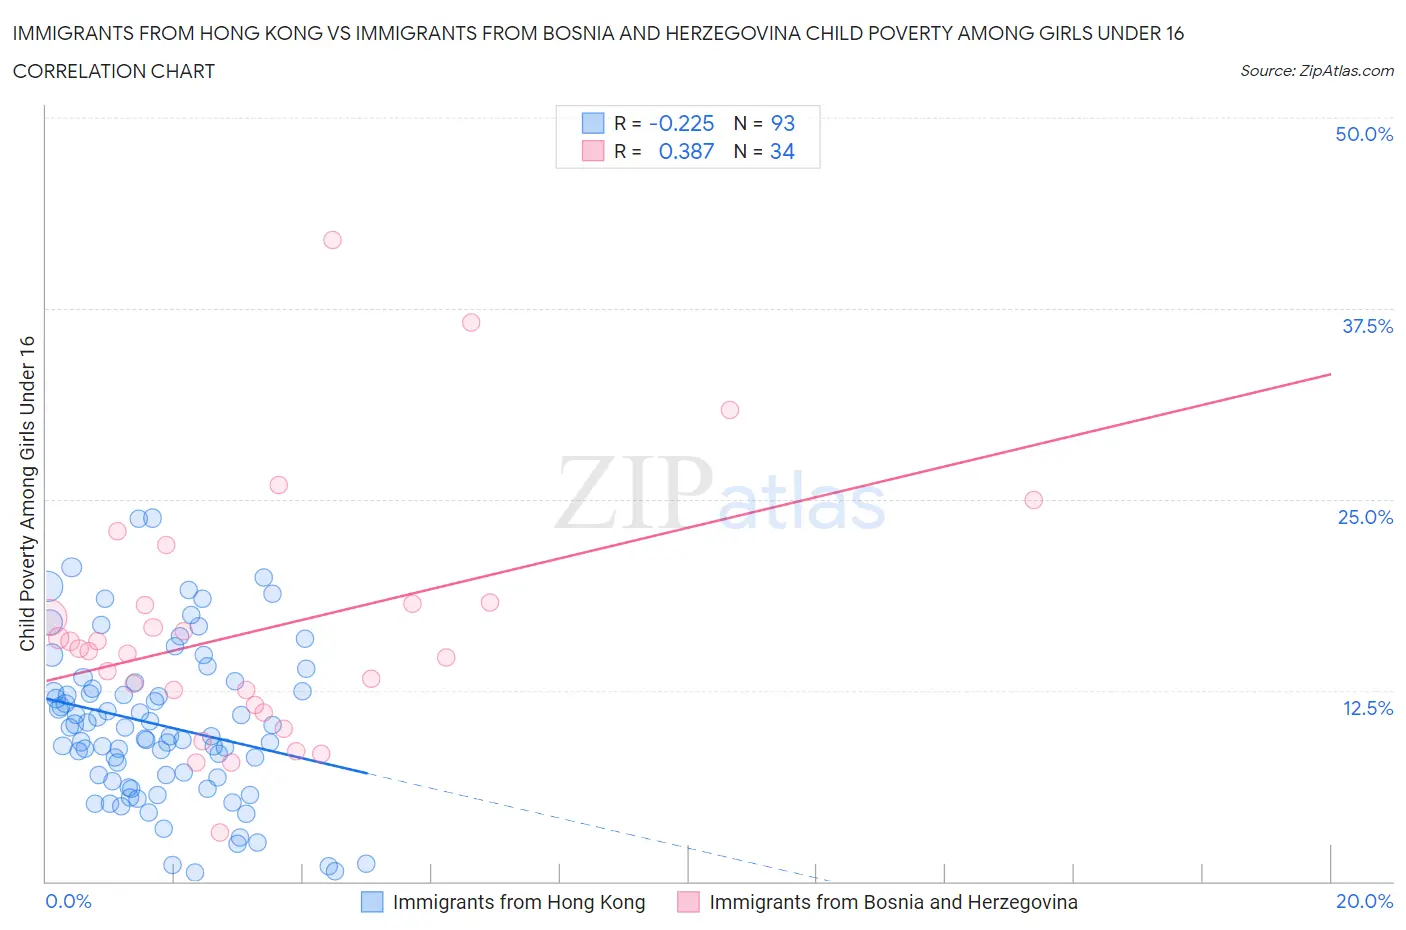 Immigrants from Hong Kong vs Immigrants from Bosnia and Herzegovina Child Poverty Among Girls Under 16